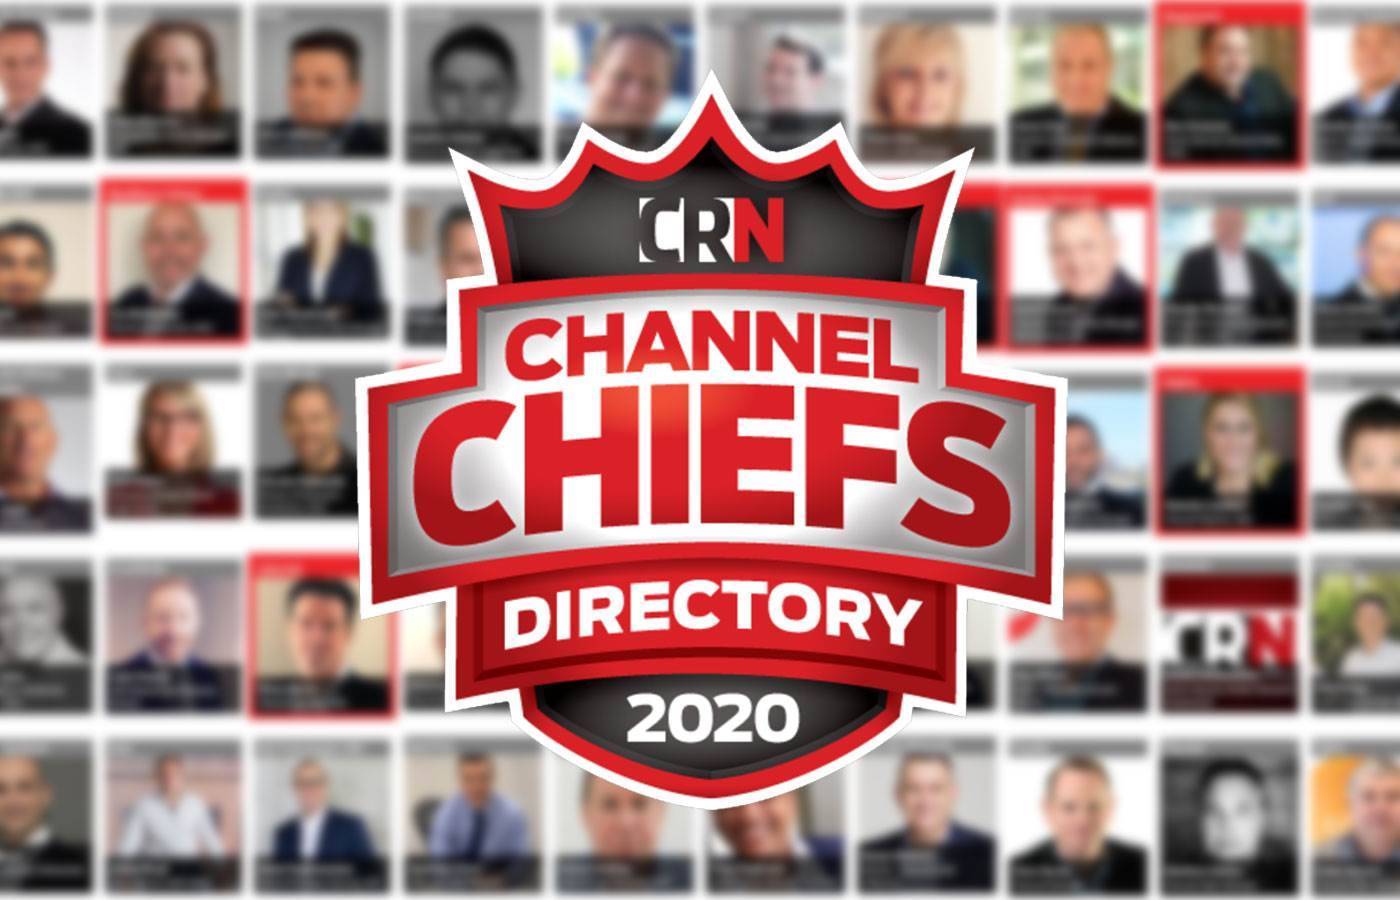 Call for entries: 2020 CRN Channel Chiefs submissions are open! - Training & Development - CRN